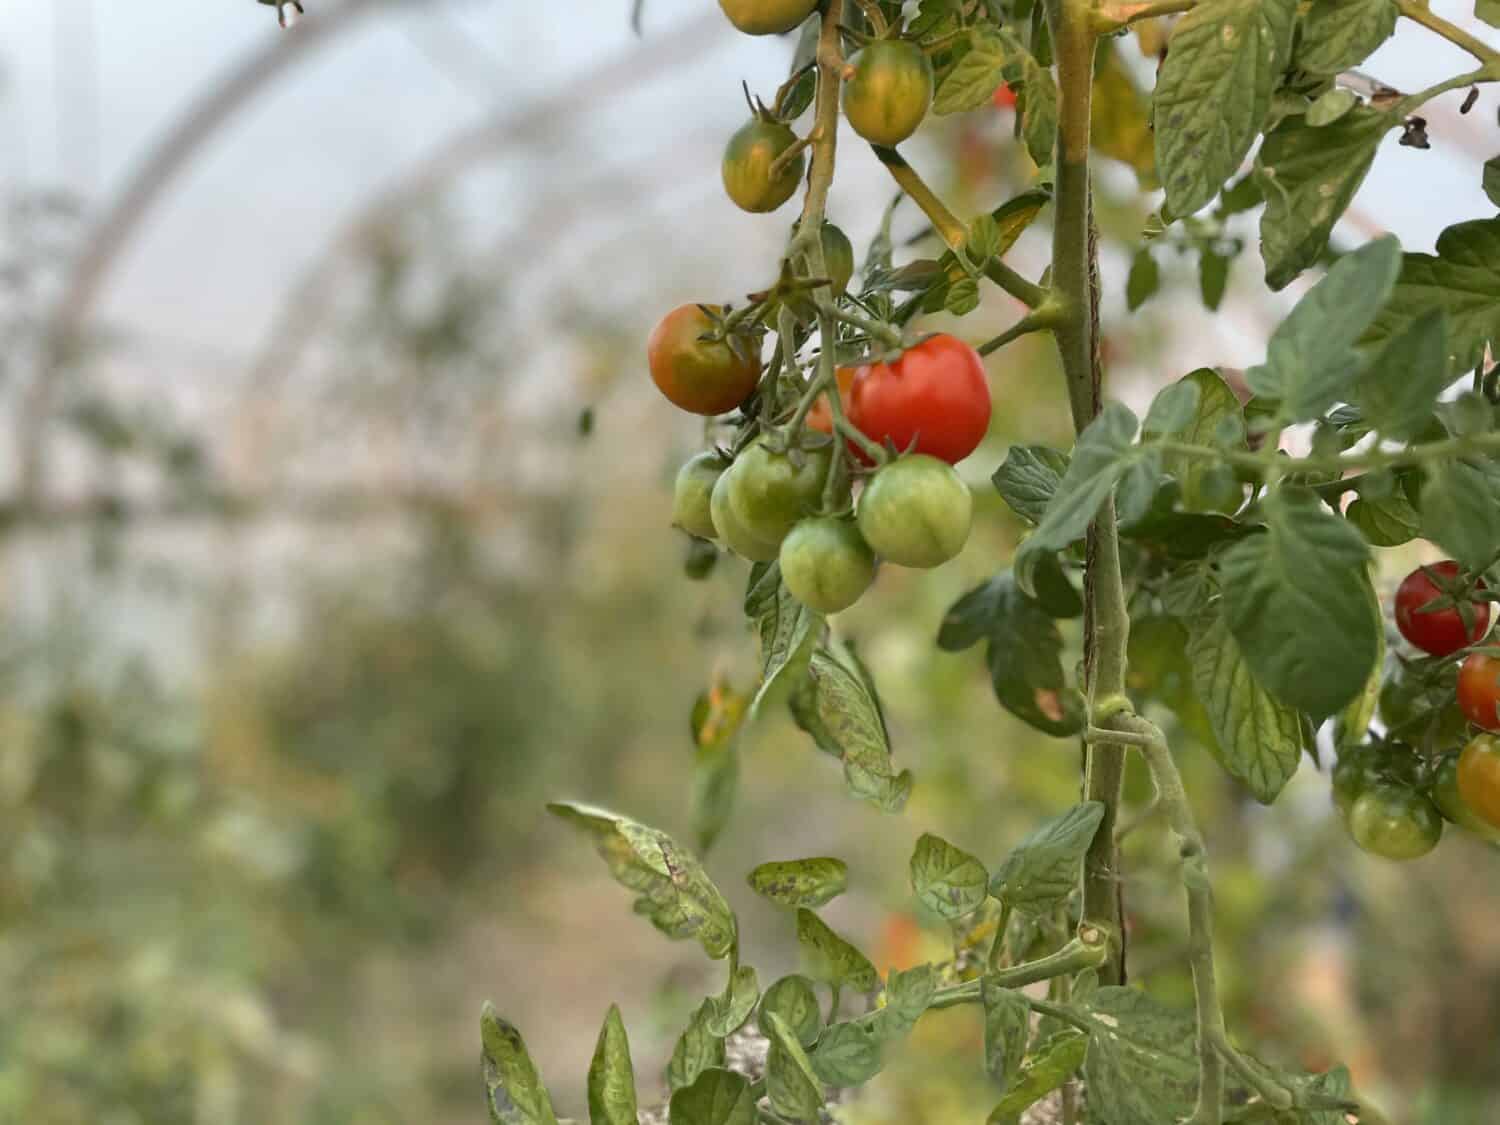 cherry tomatoes in the greenhouse - Summer Sunsets, Fall Harvest